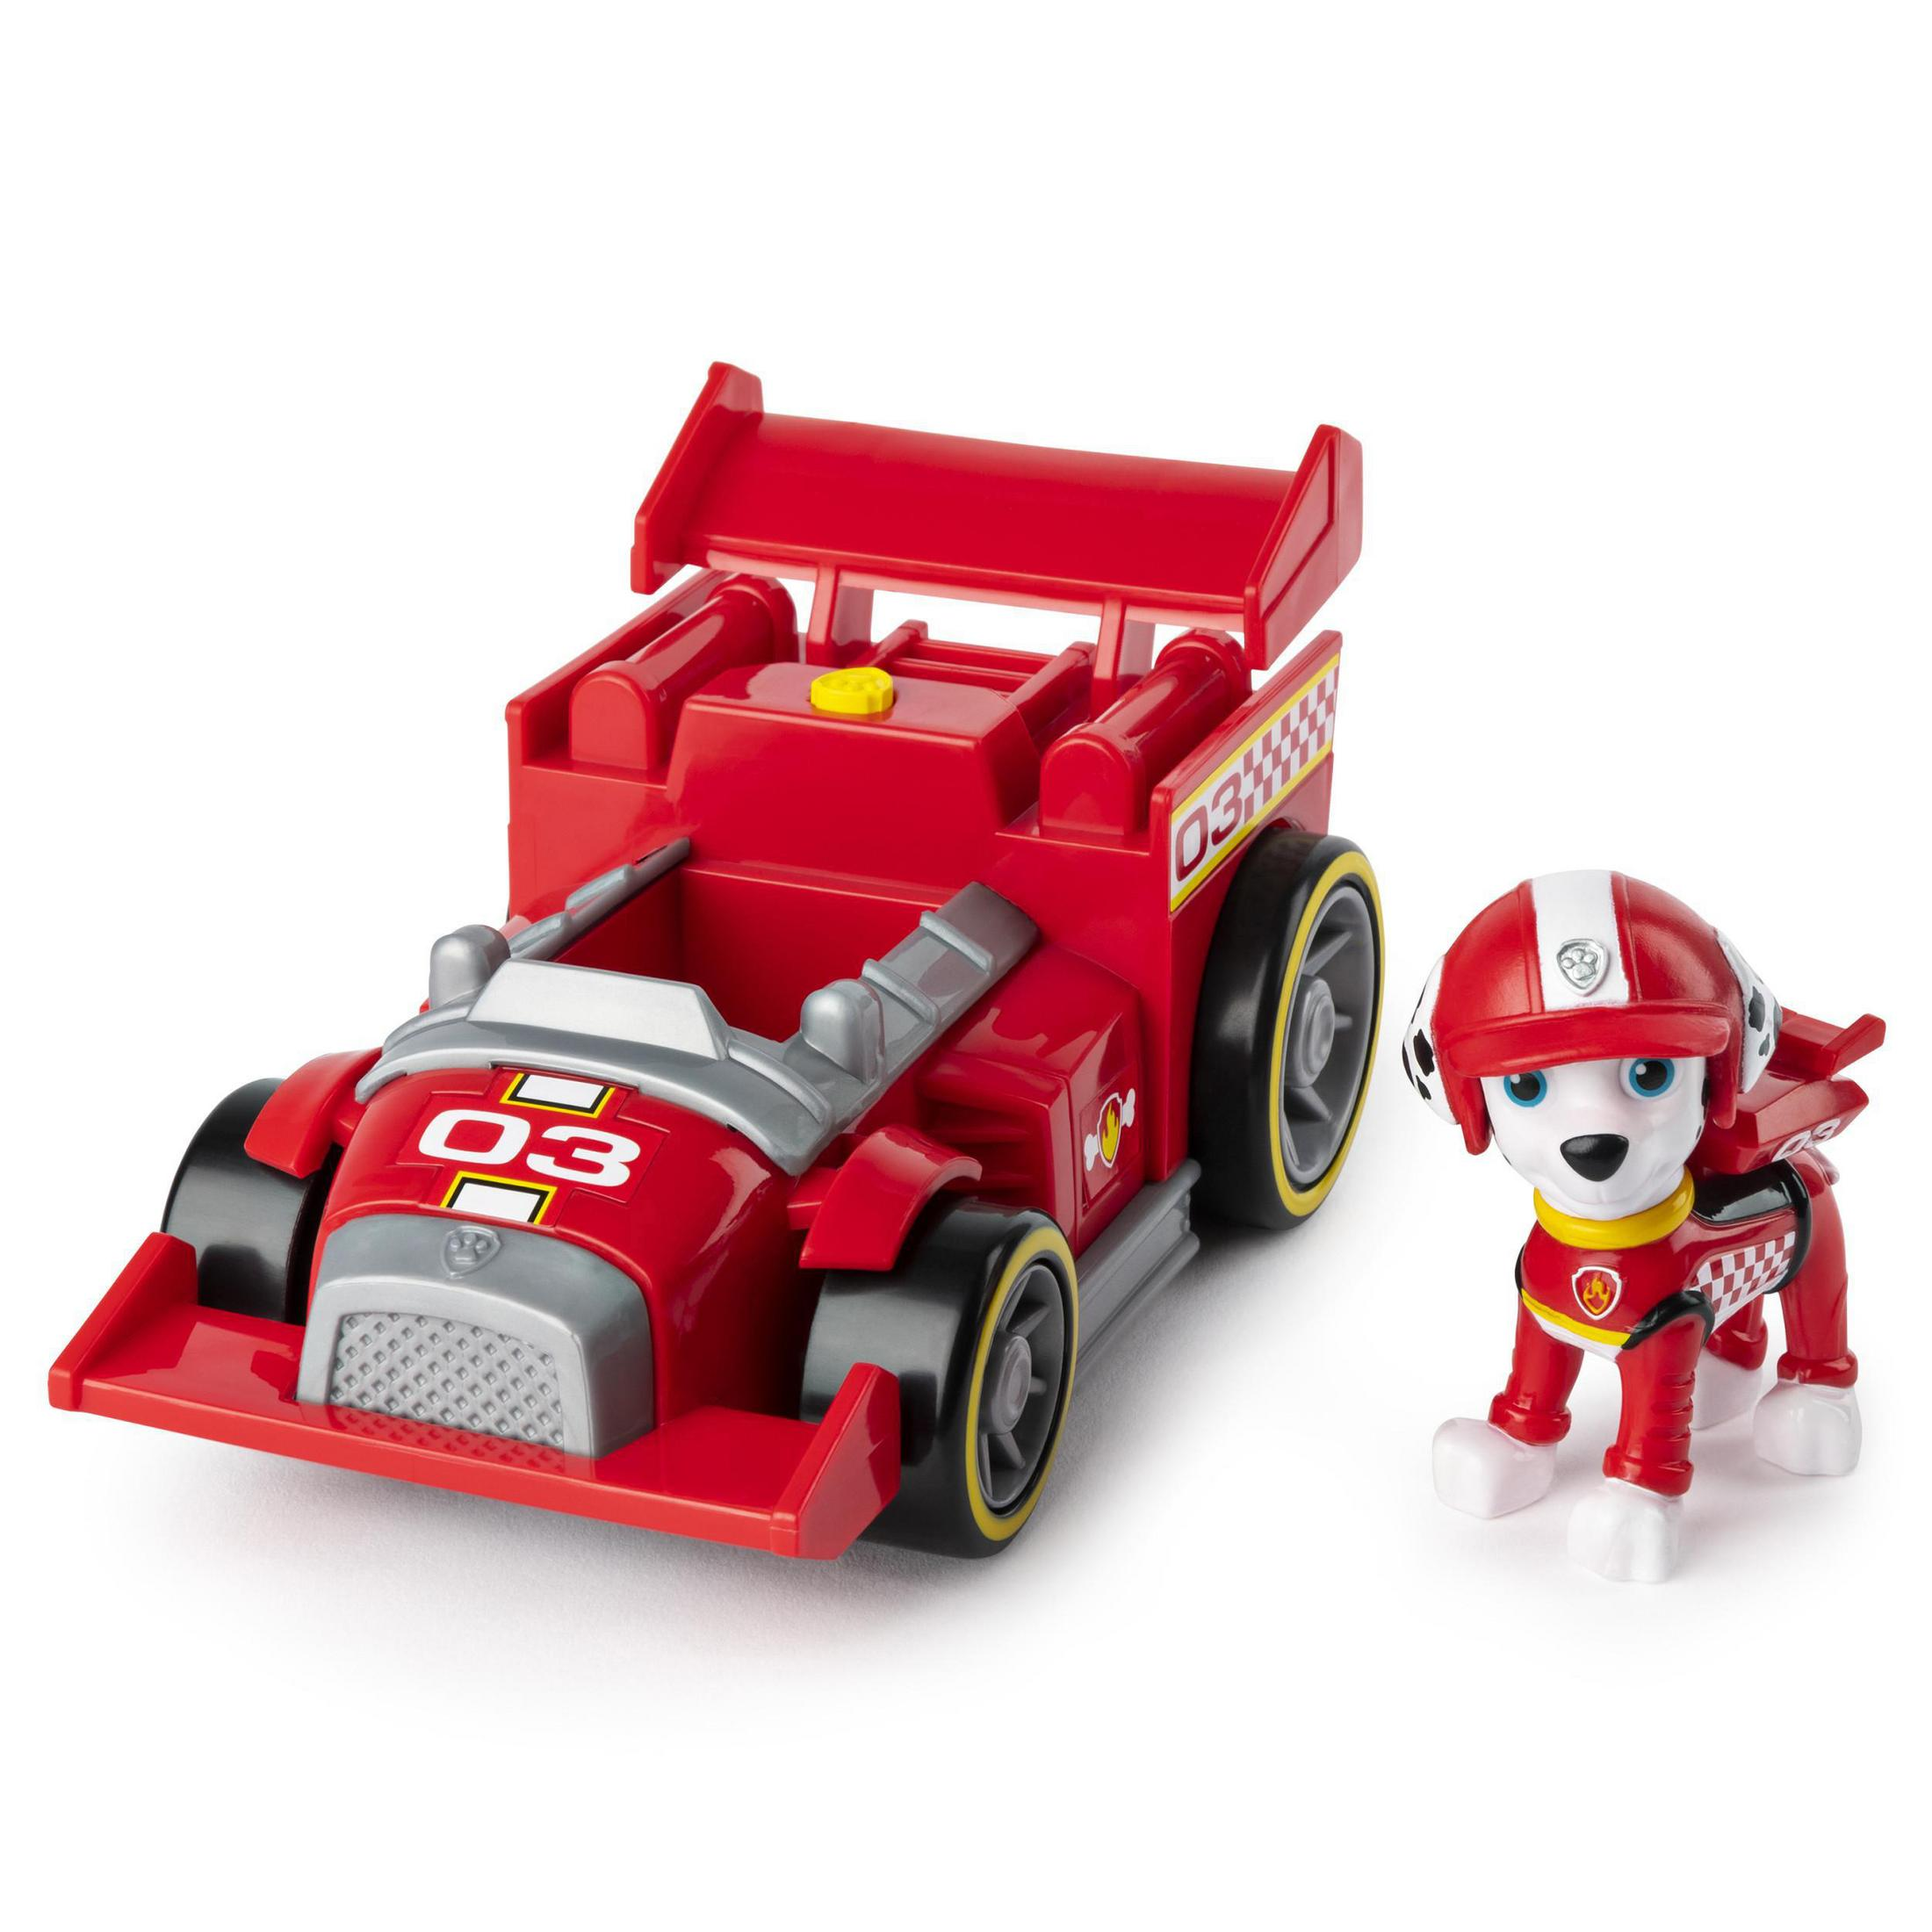 VEHICLE Spielset MARSHALL 28190 Mehrfarbig R,R,R SPIN MASTER PAW THEMED